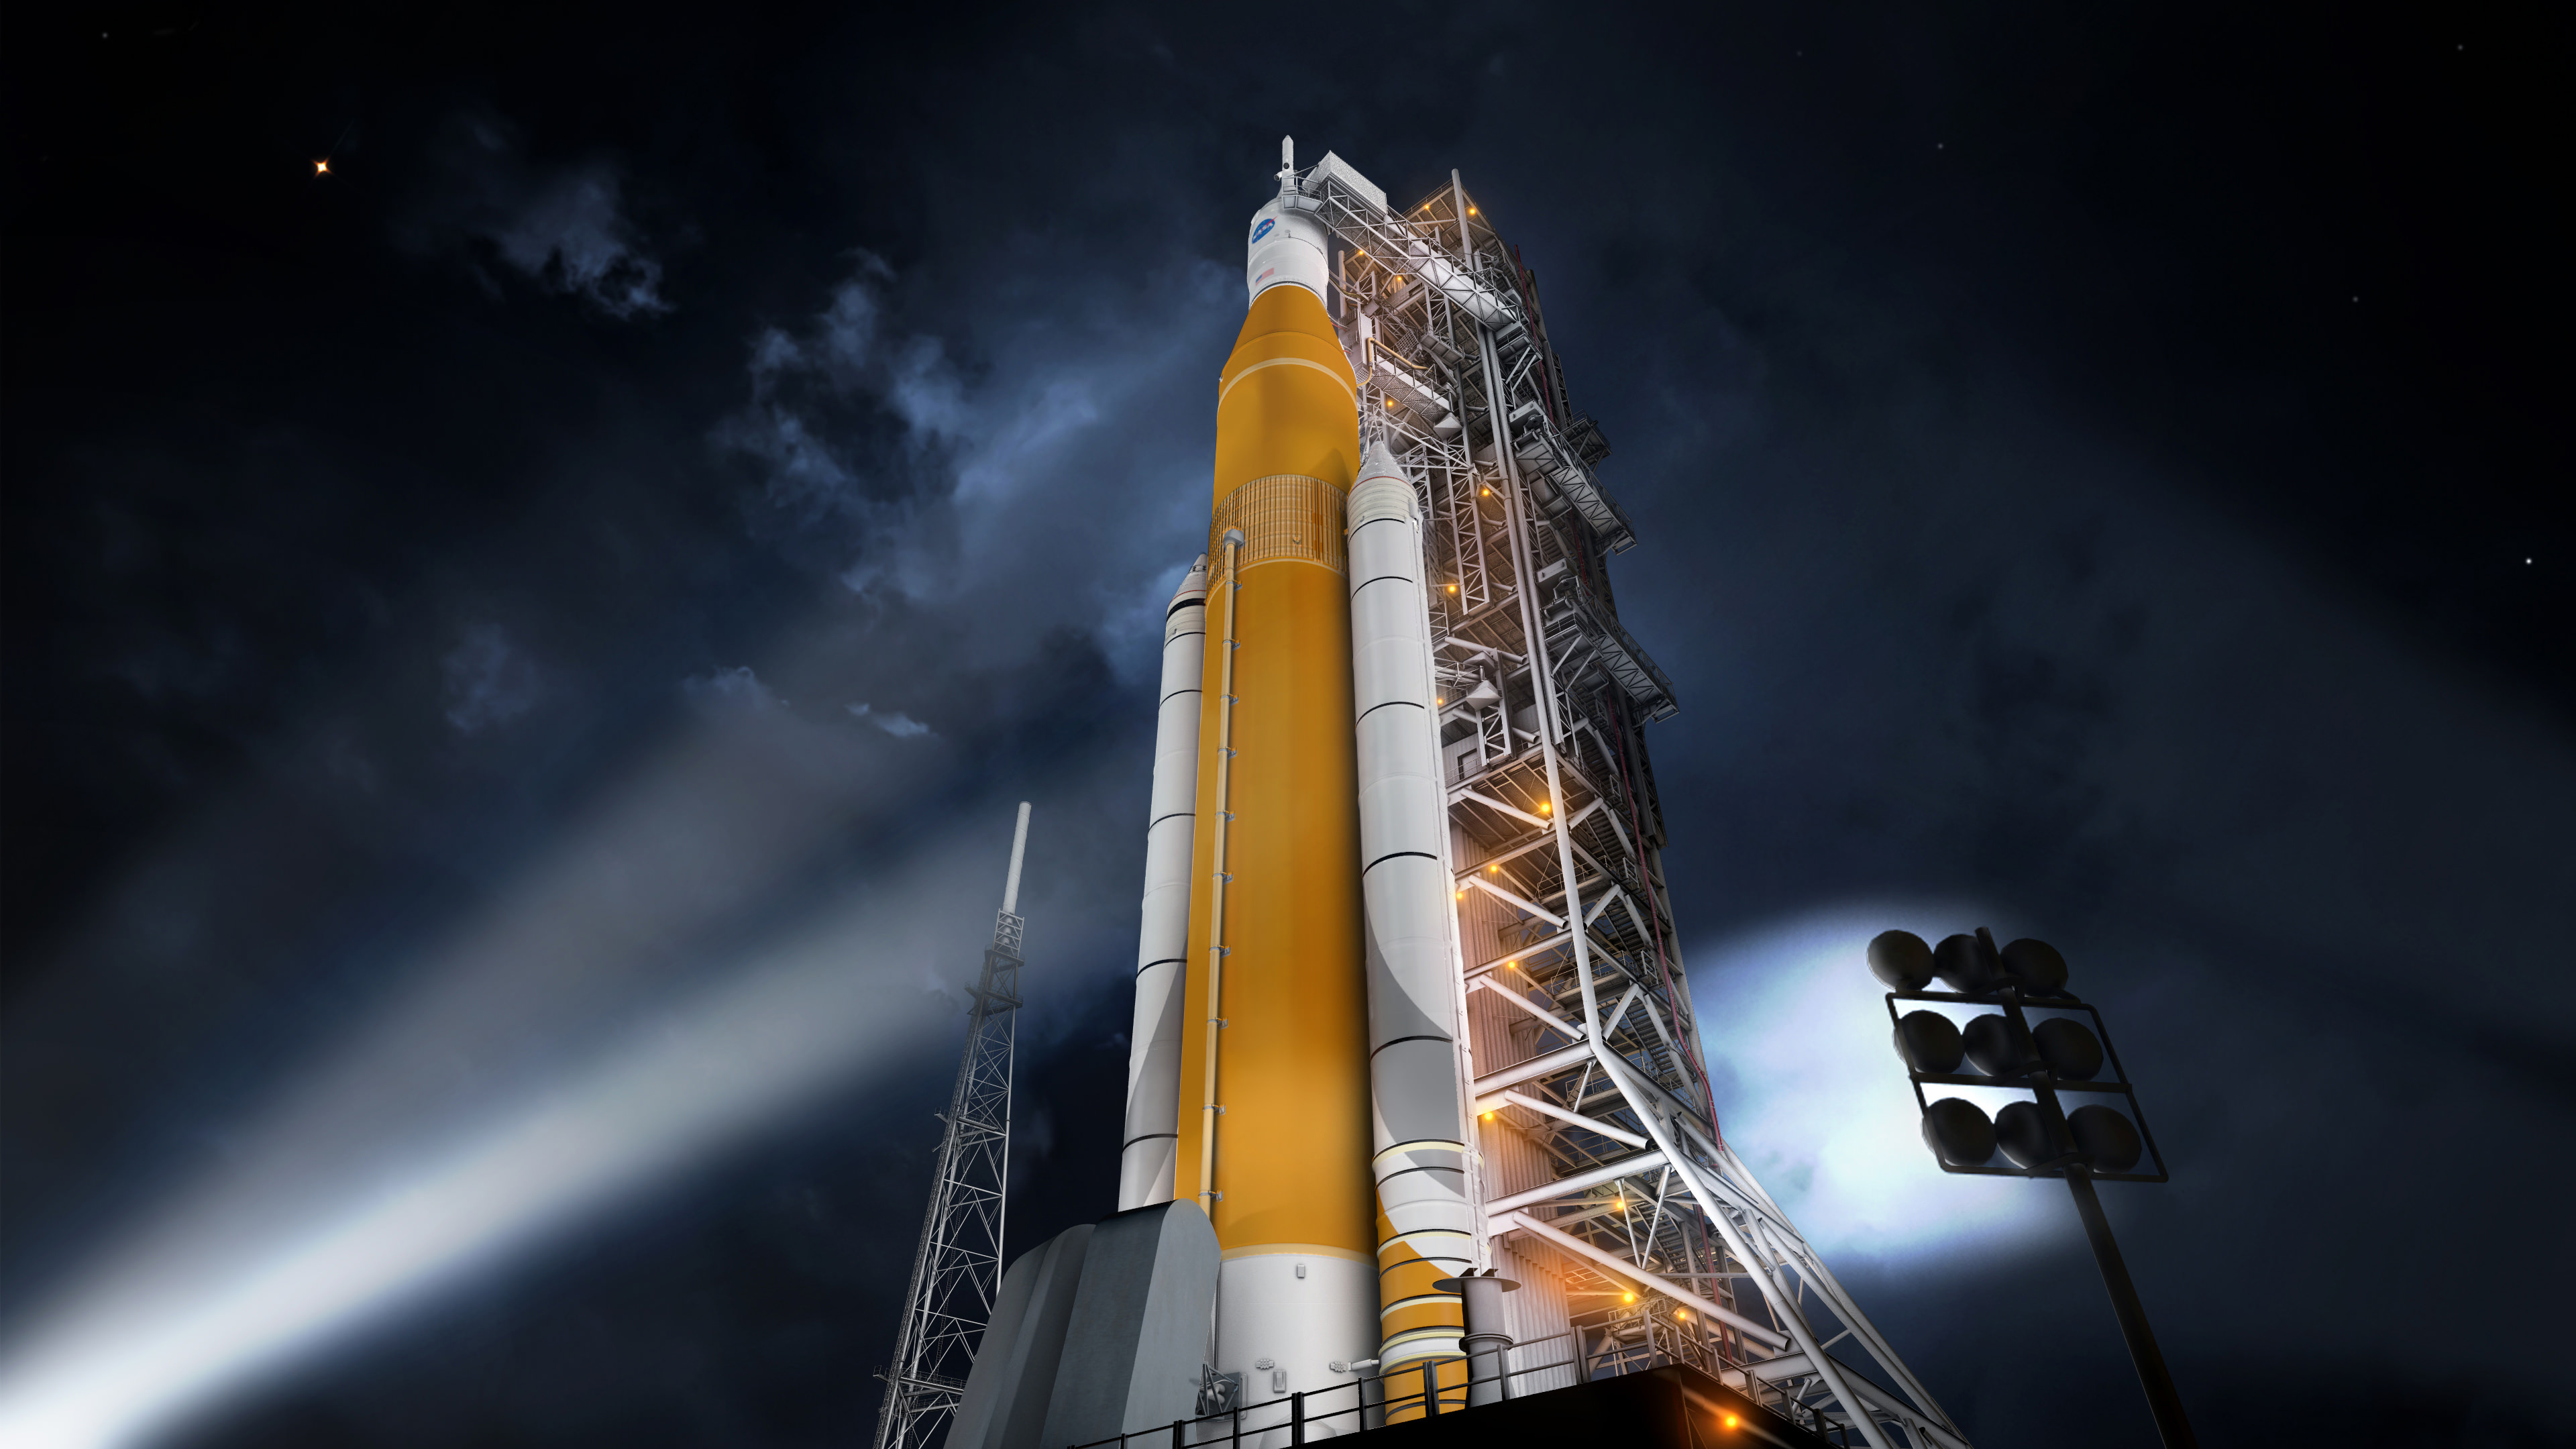 Artist concept of the SLS Block 1 configuration on the Mobile Launcher at KSC. Credit: NASA/MSFC